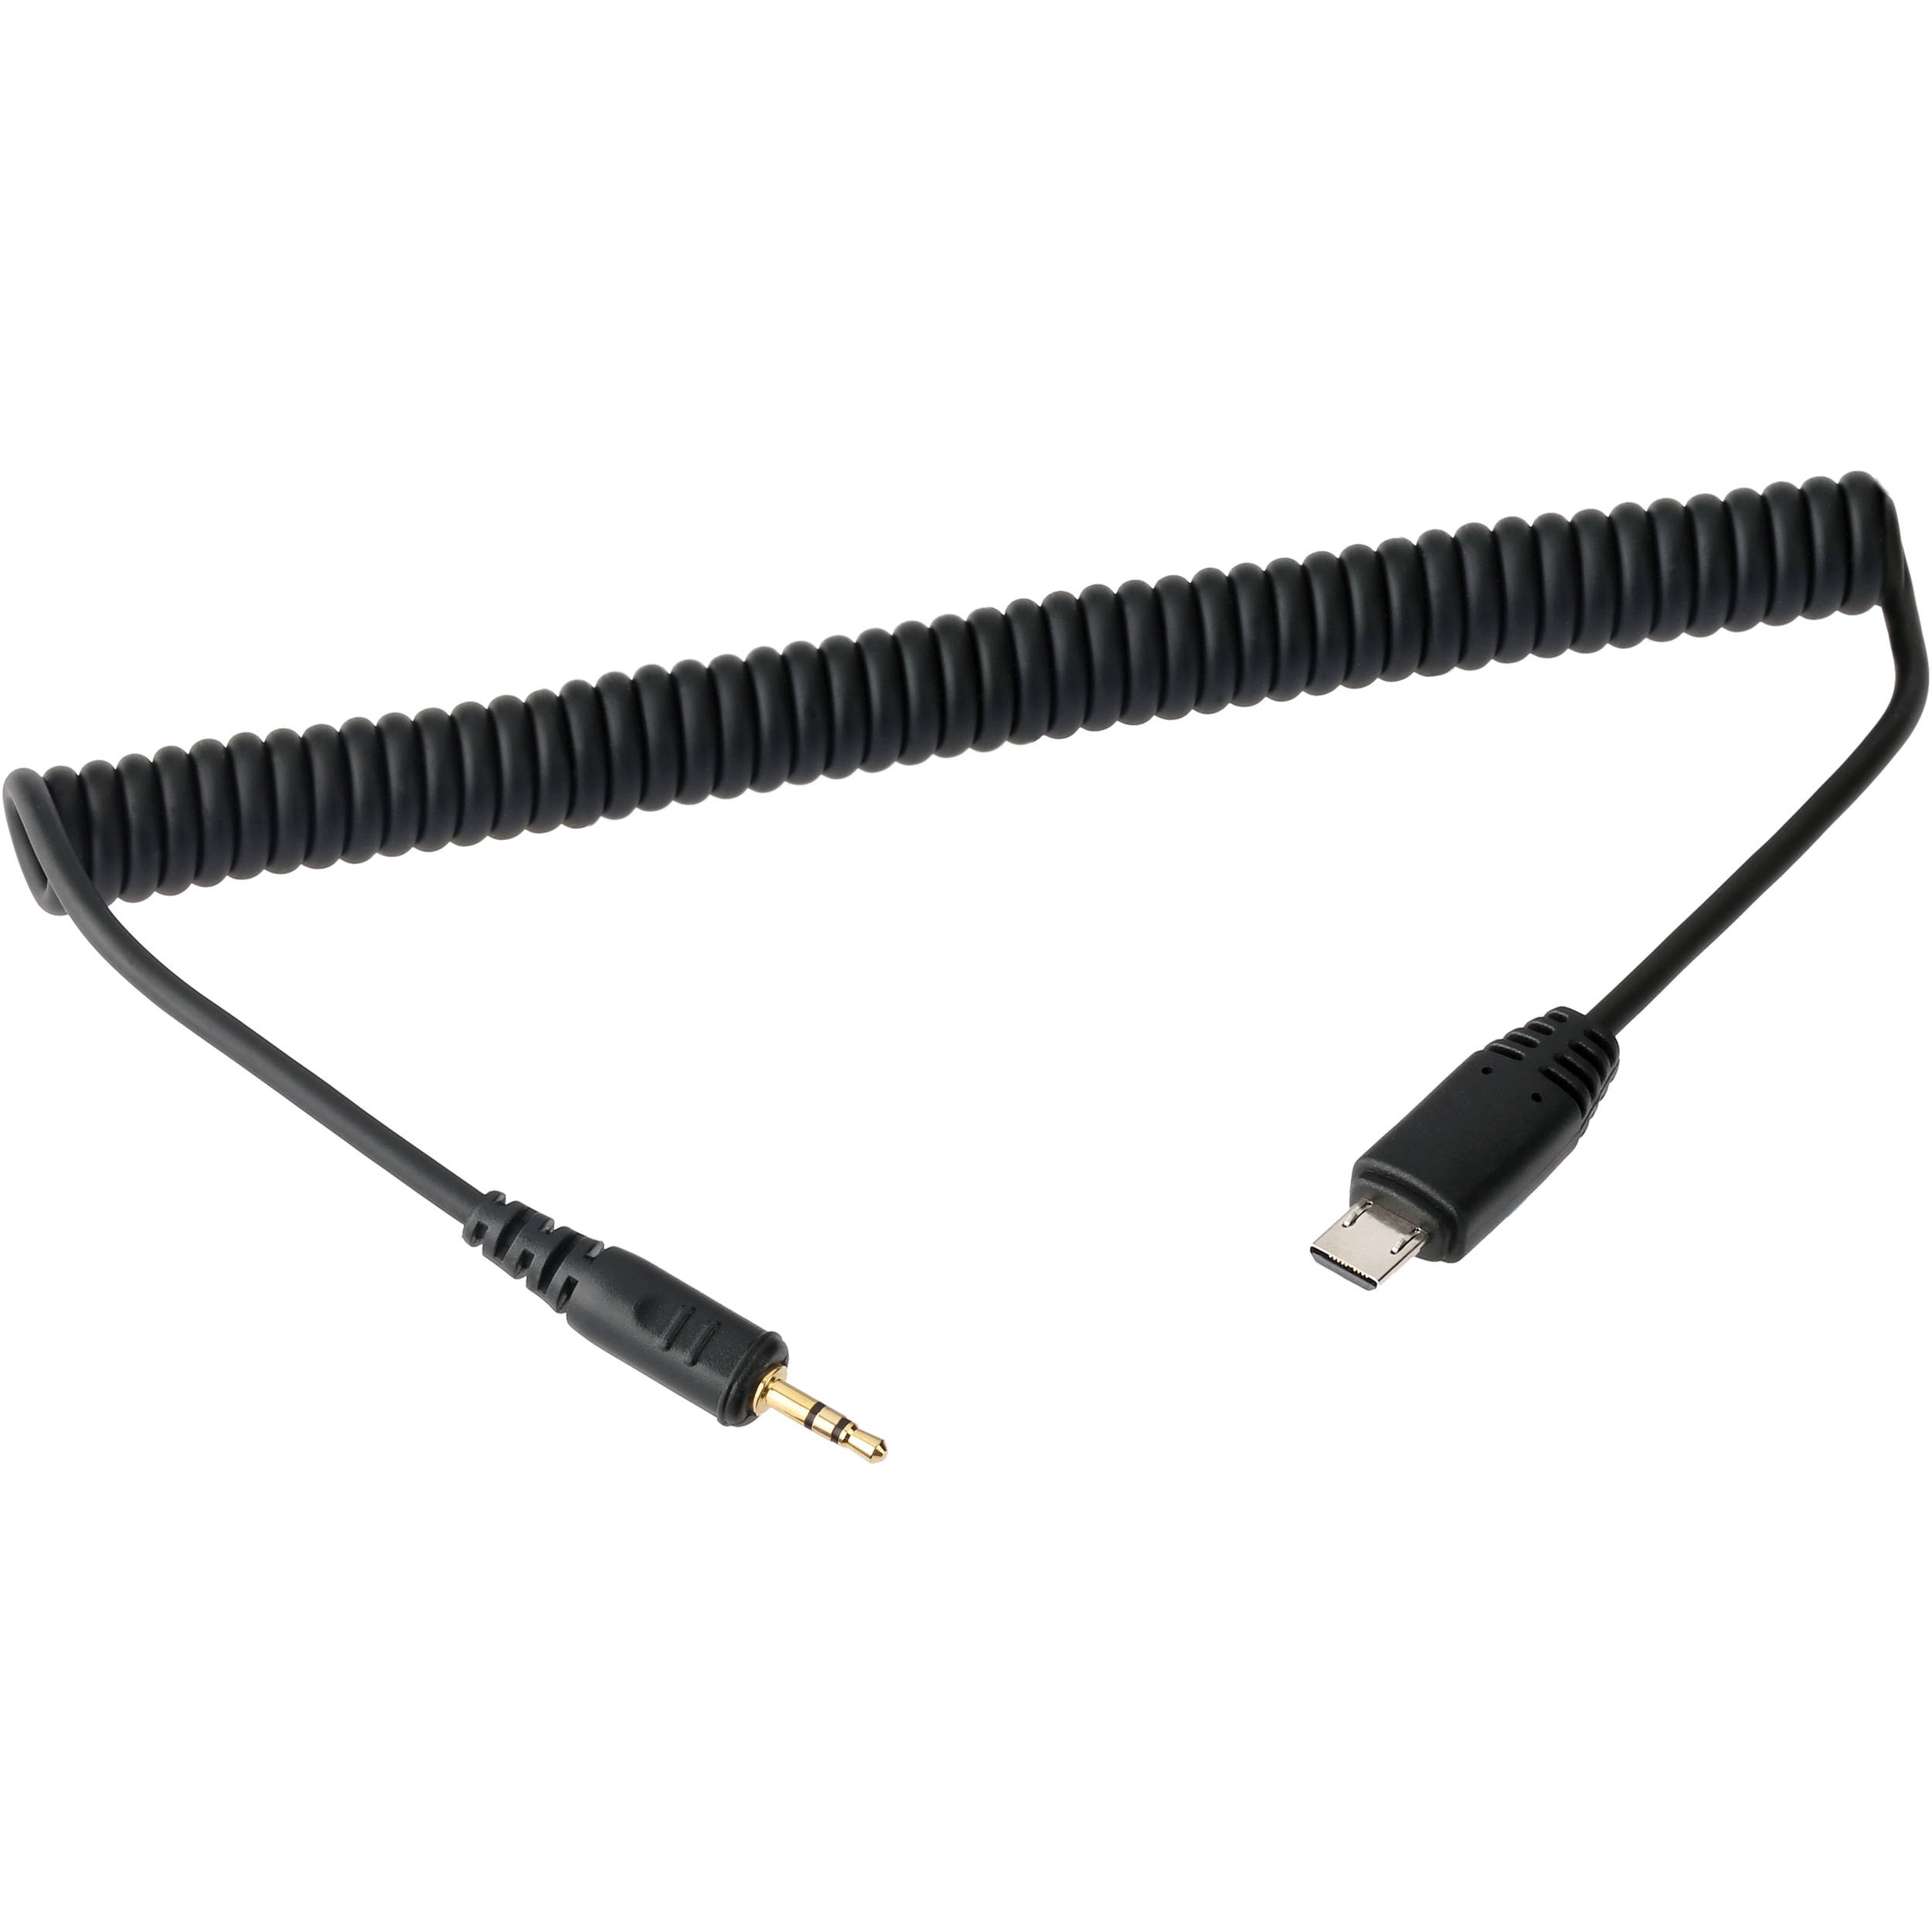 Vello 2.5mm Remote Shutter Release Cable for Select Sony Cameras